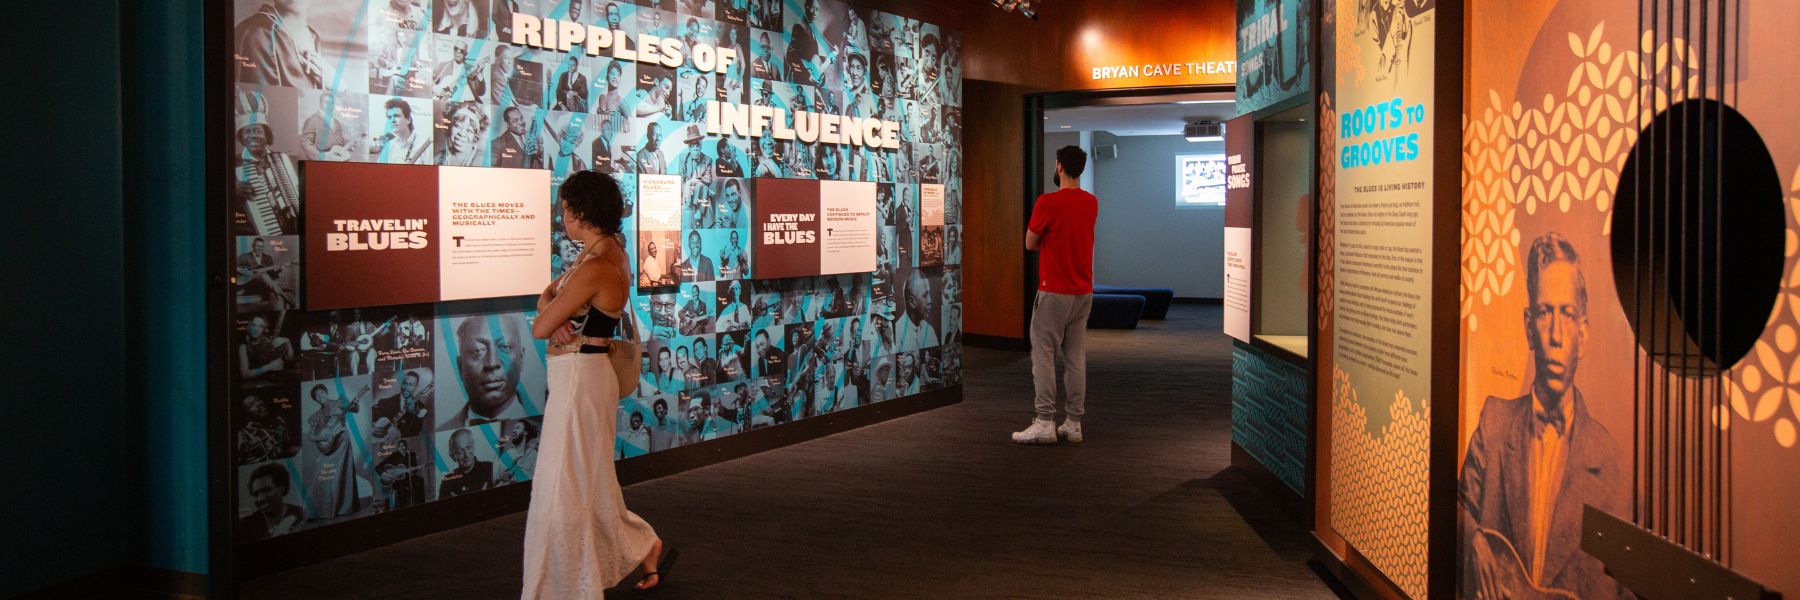 Visitors explore the artifact-driven exhibits at the National Blues Museum.